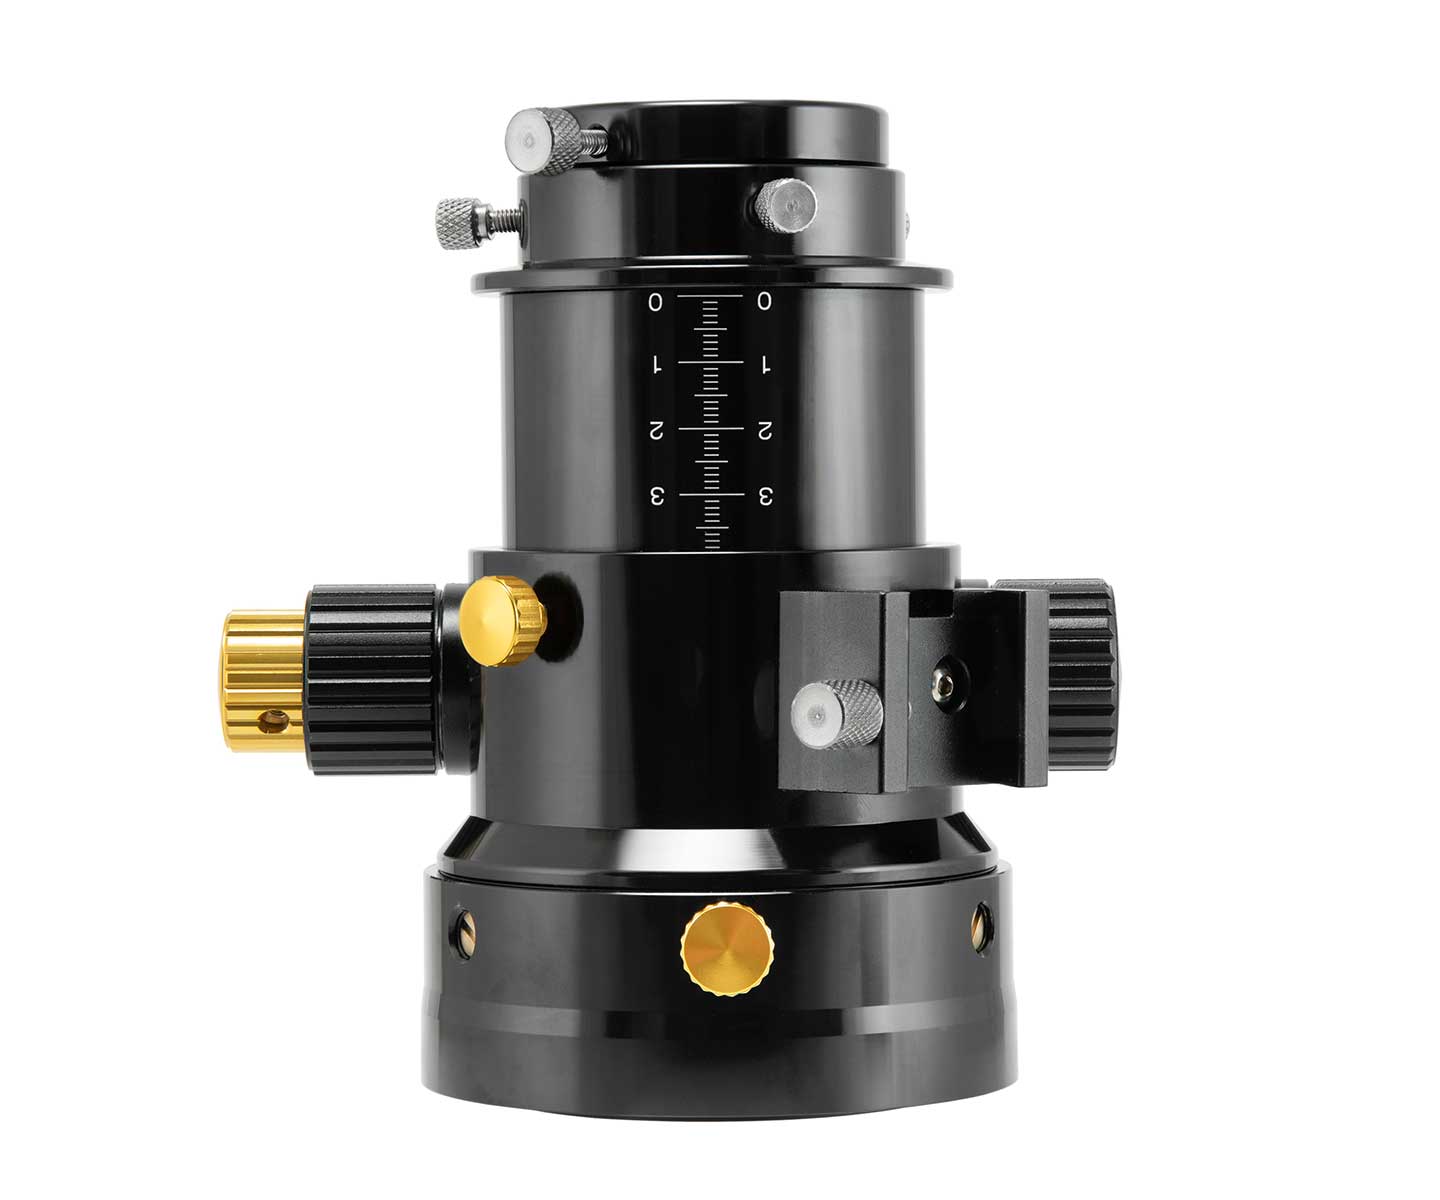  TS-Optics 2.5" Rack and Pinion Focuser with M90x1 Connection and 360° Rotation [EN] 